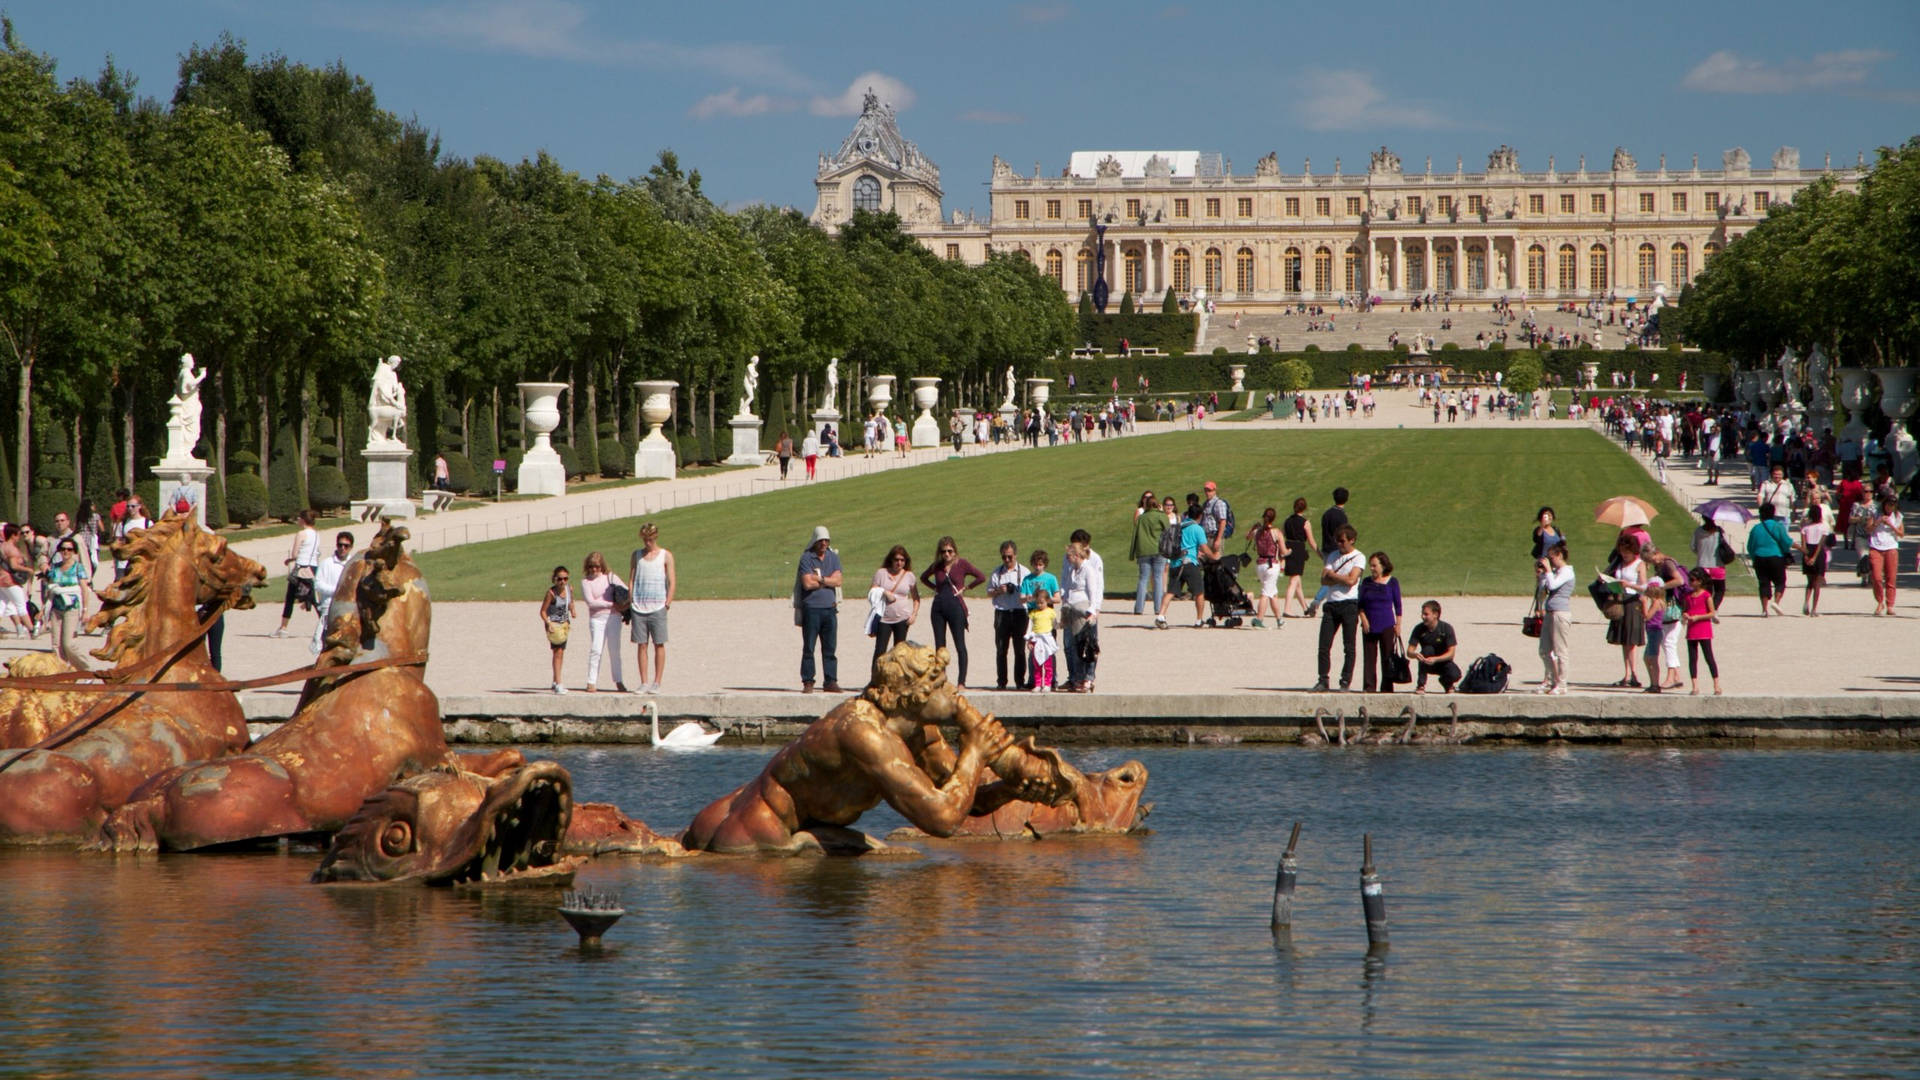 Majestic Apollo's Fountain At The Palace Of Versailles